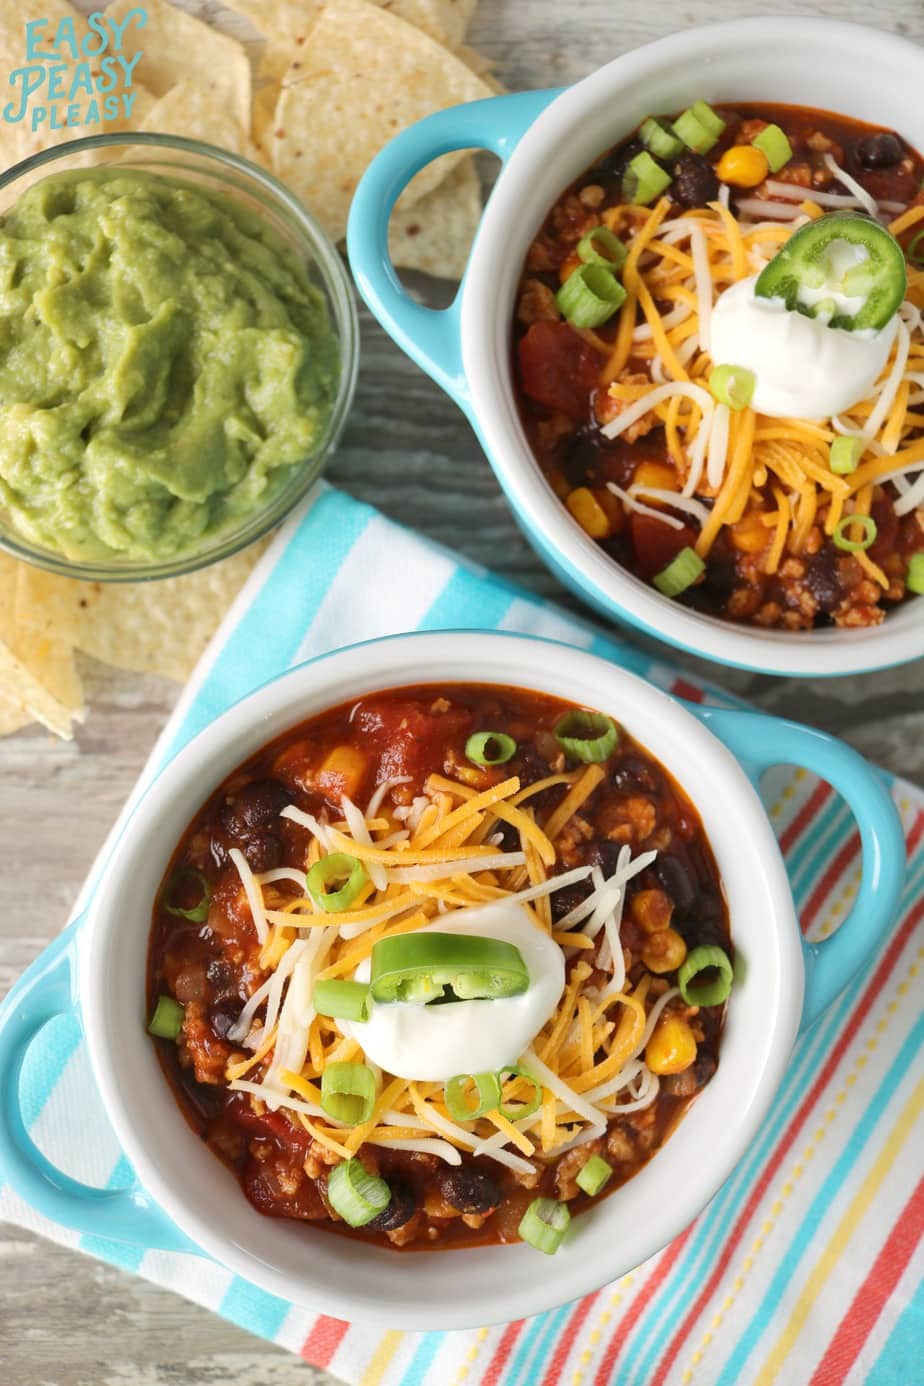 This Chicken Chili is the perfect easy weeknight meal your whole family will love.